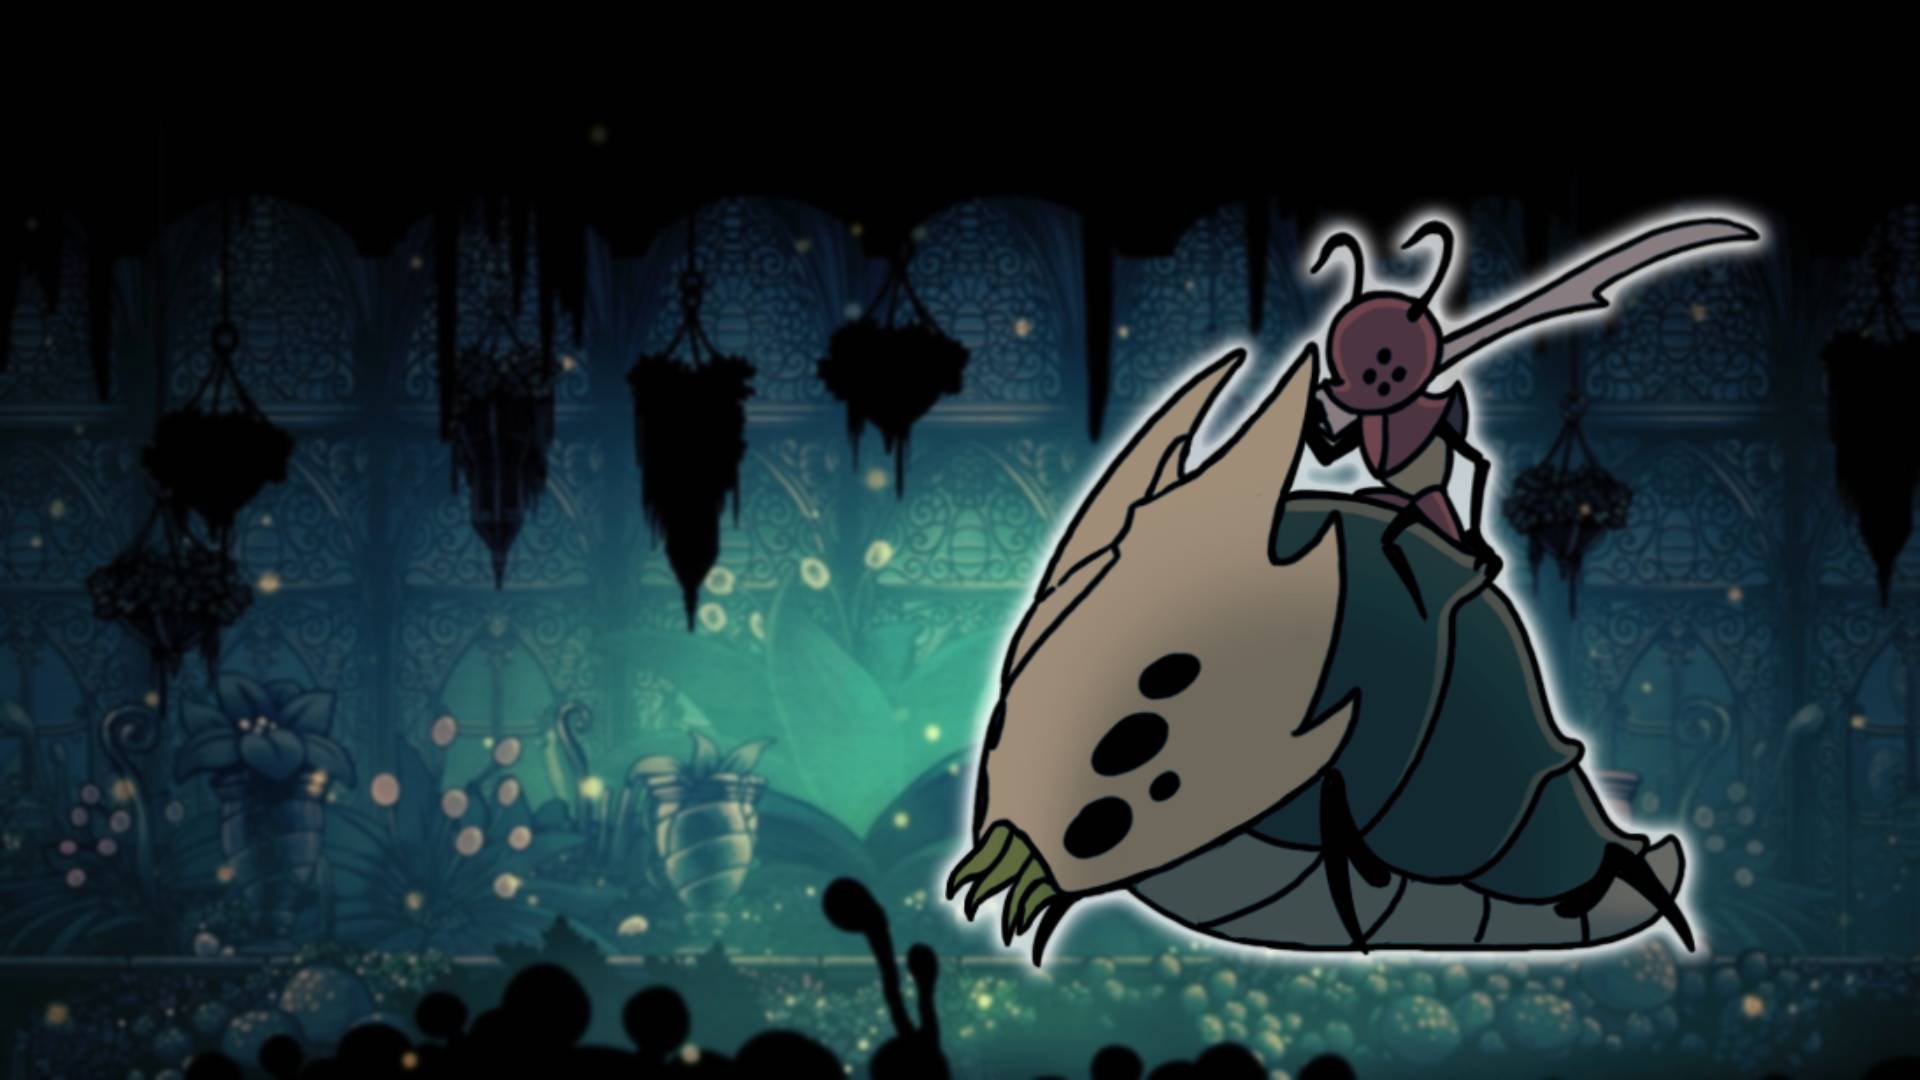 God Tamer - the Hollow Knight boss, is visible against a mossy green background area from Hollow Knight 